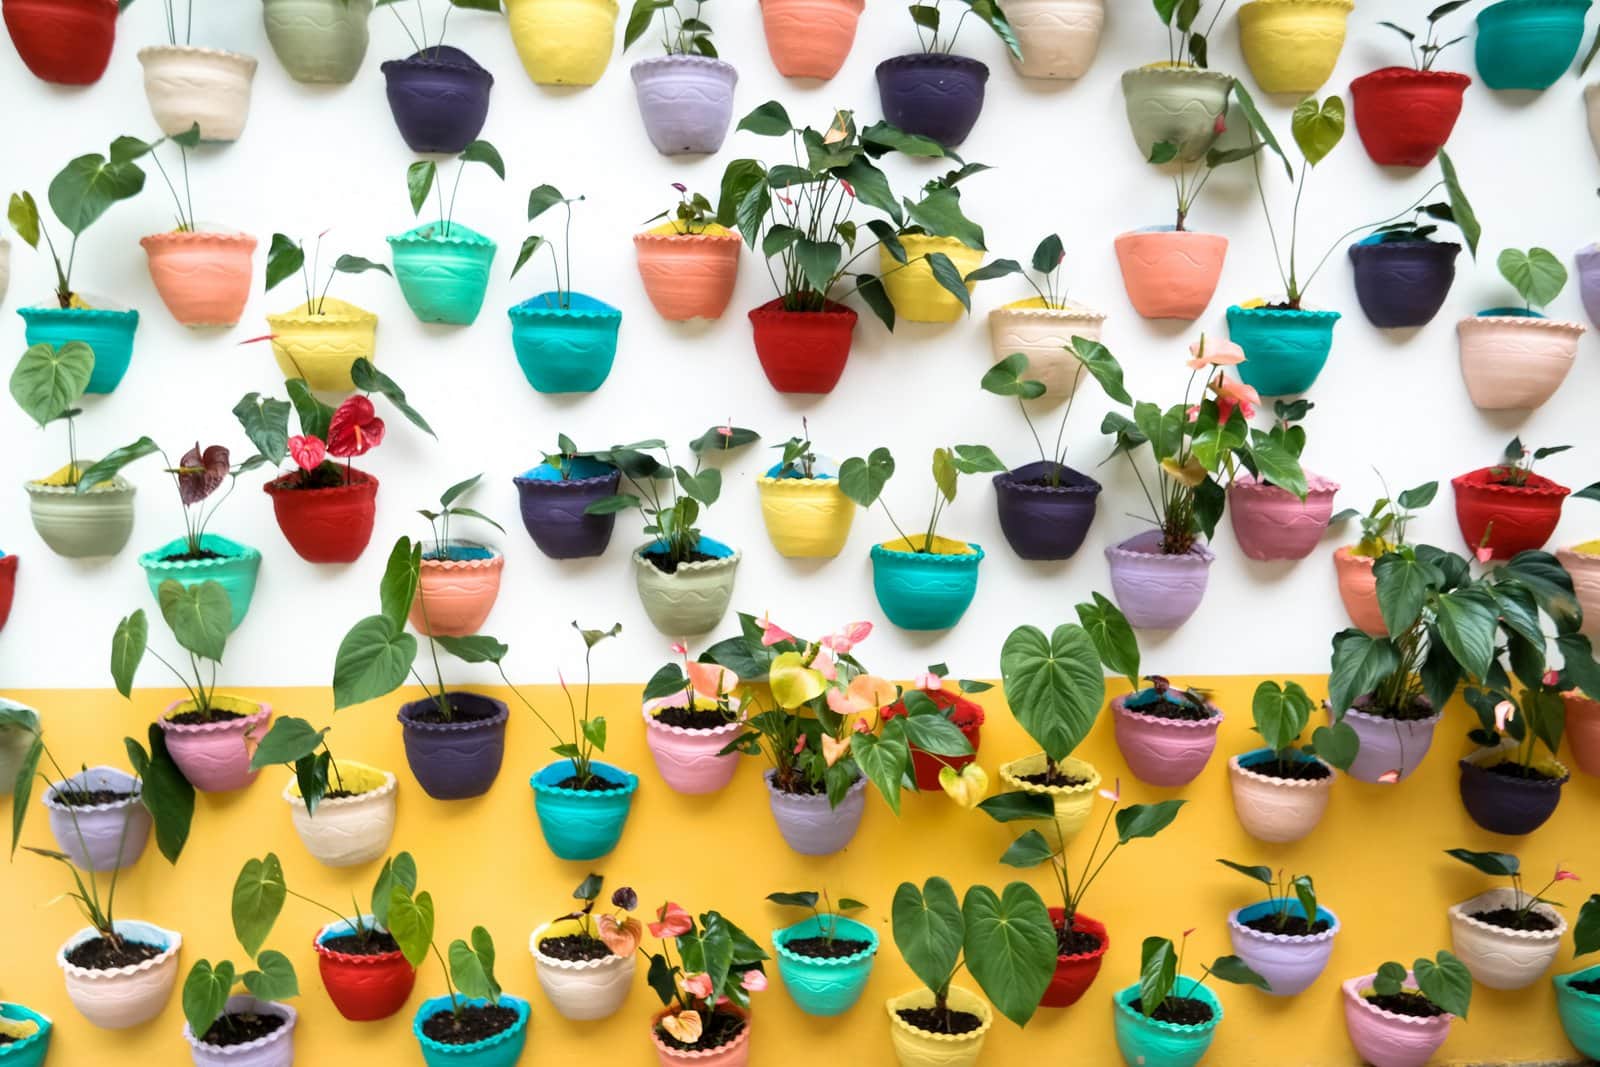 Indoor plants decorating: Pretty wall of super colorful plant pots with live plants